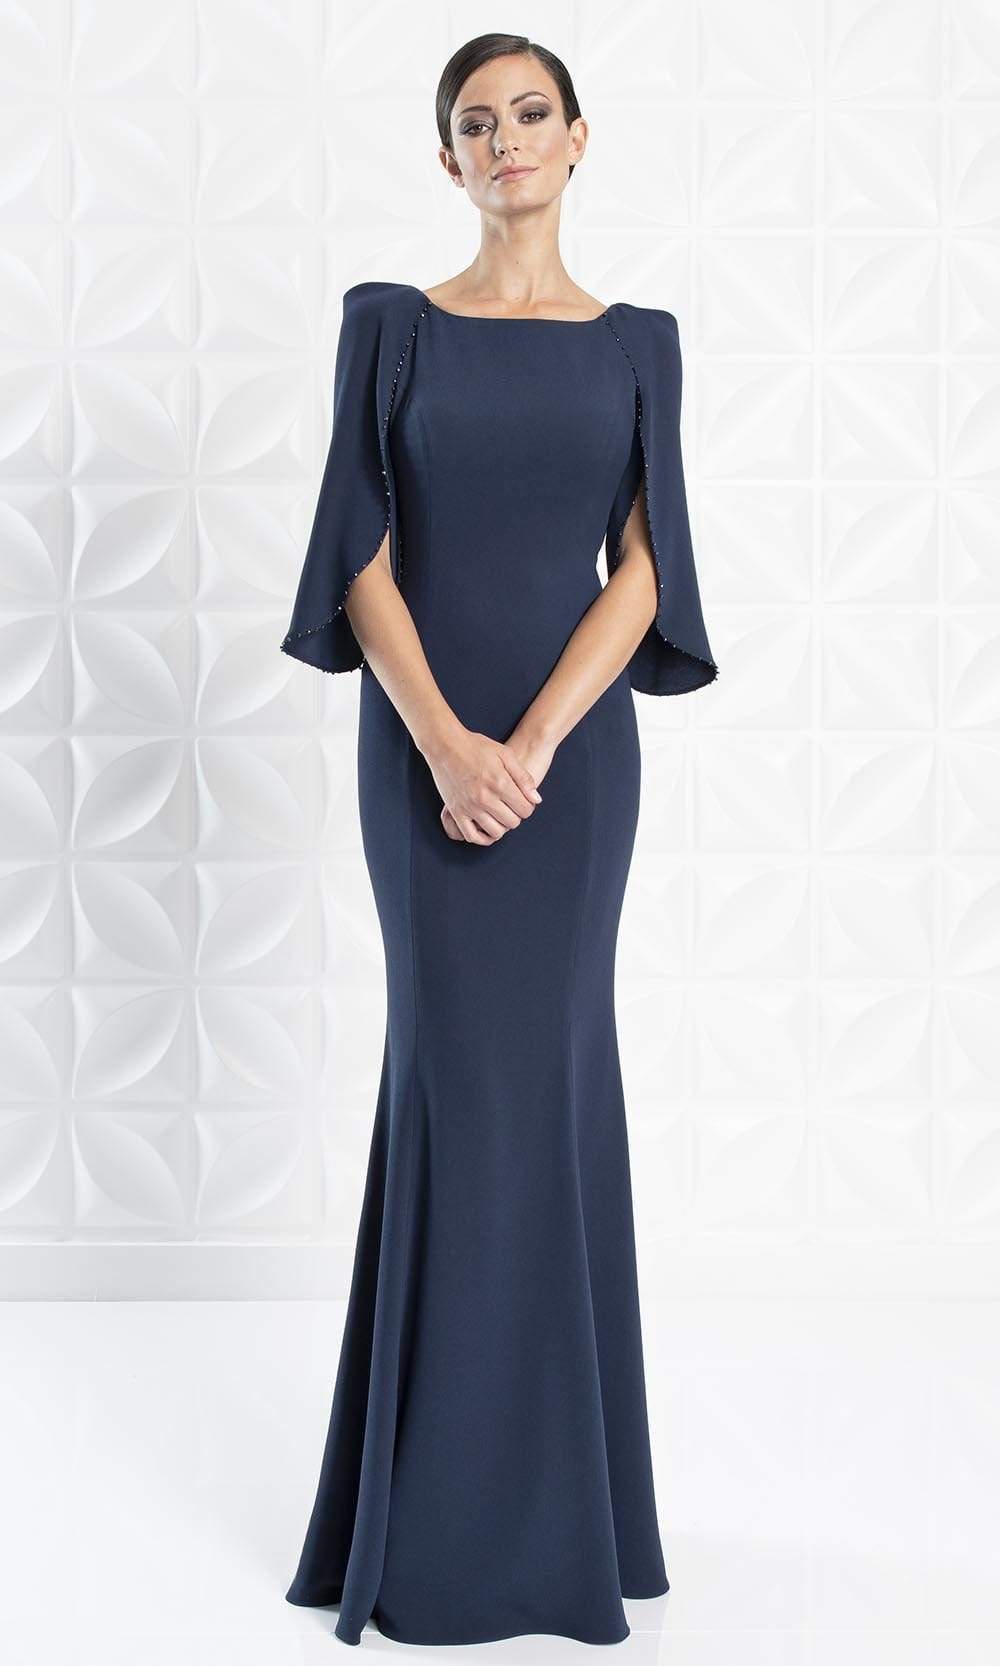 Alexander By Daymor - Cape Sleeve Bateau Neck Mermaid Gown 1259 - 1 pc Midnite In Size 16 Available CCSALE 16 / Midnite